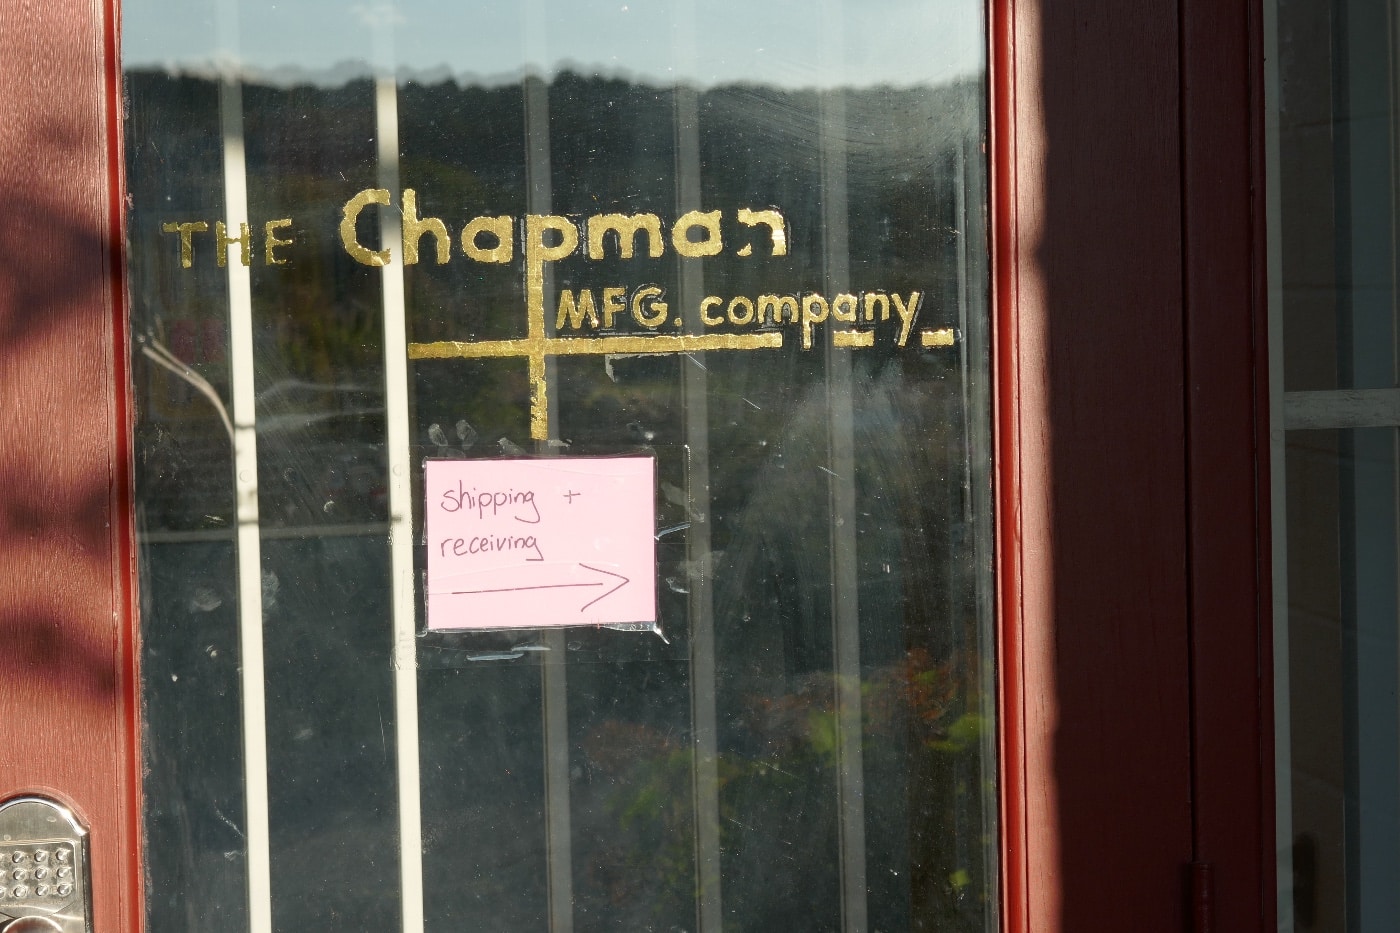 Chapman Manufacturing, one of the well known names in gunsmithing tools, first opened for business nearly 90 years ago.